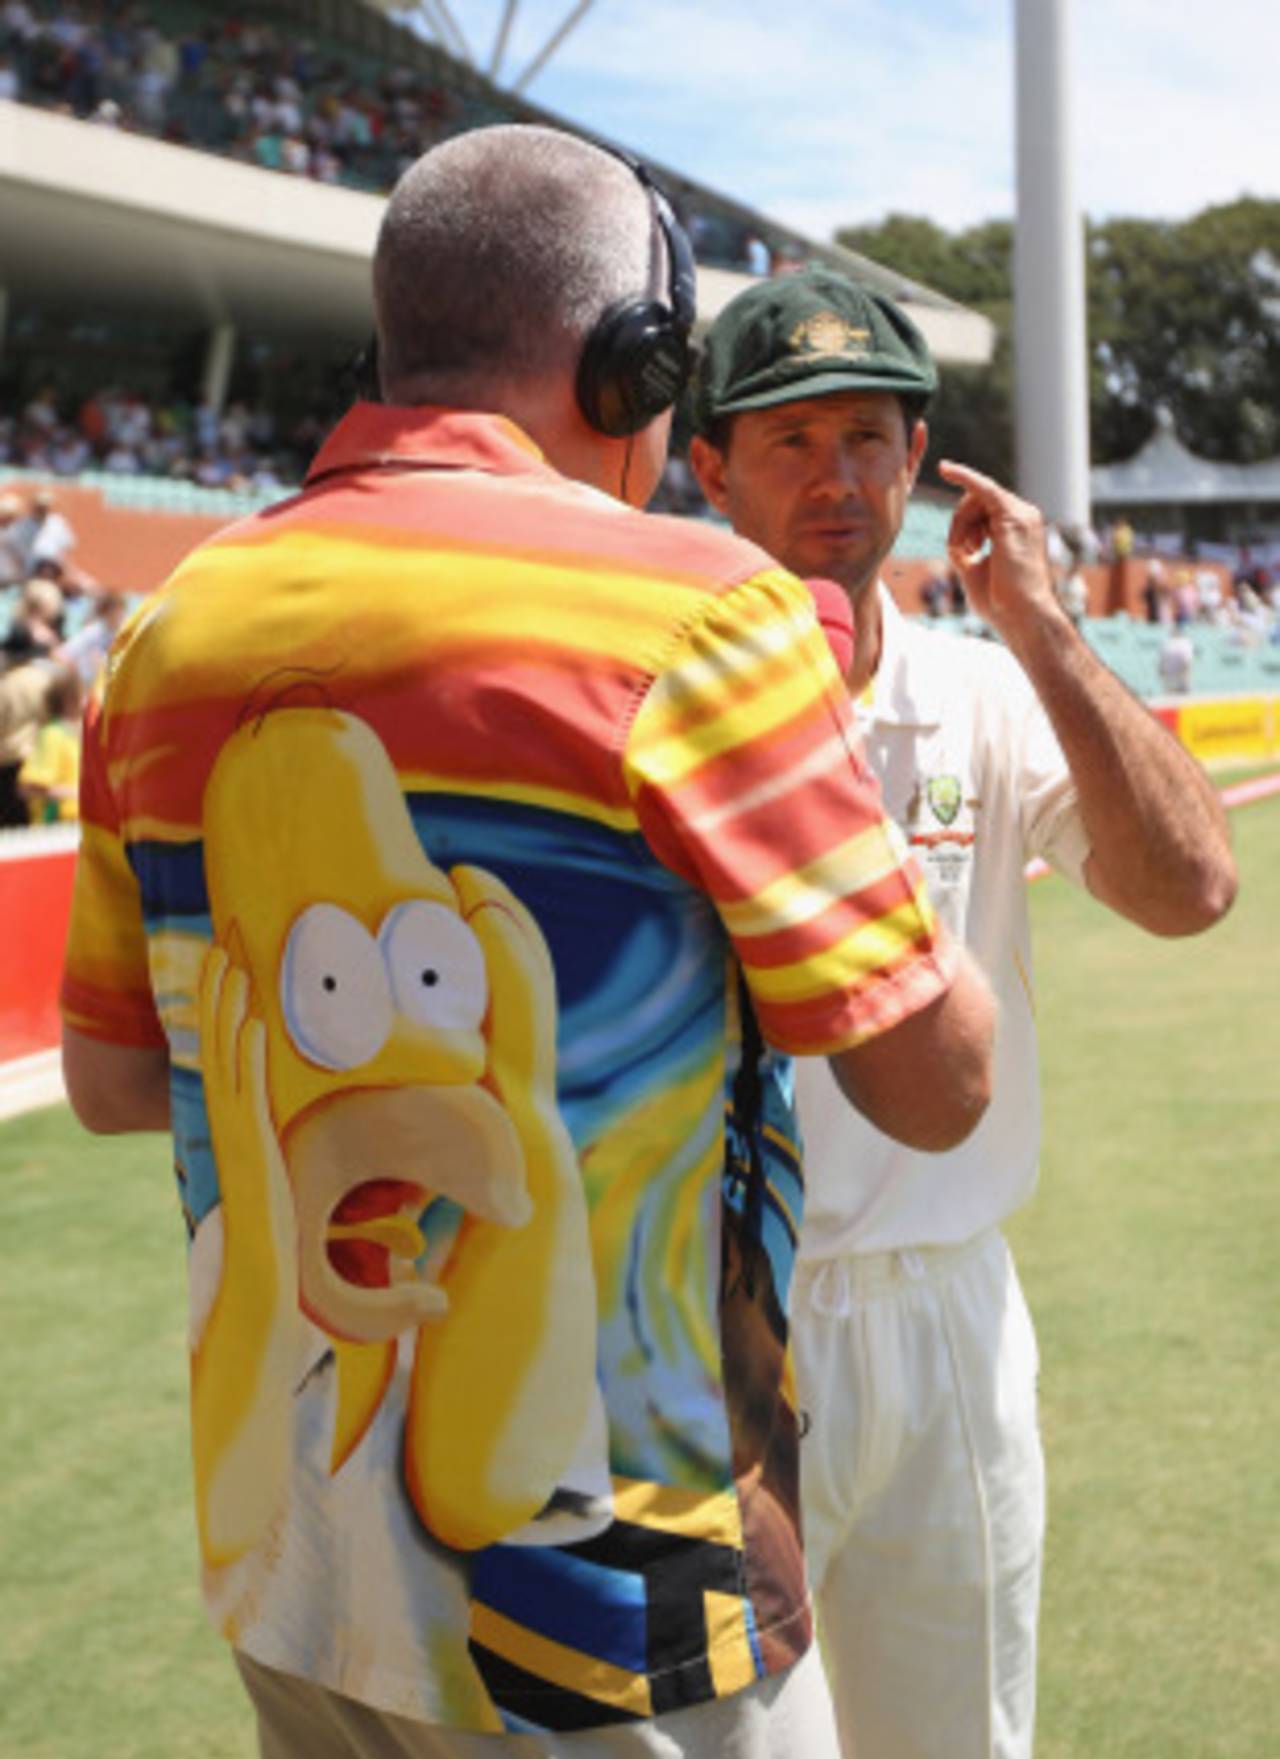 Ricky Ponting answers questions after Australia's loss, Australia v England, 2nd Test, Adelaide, 5th day, December 7, 2010